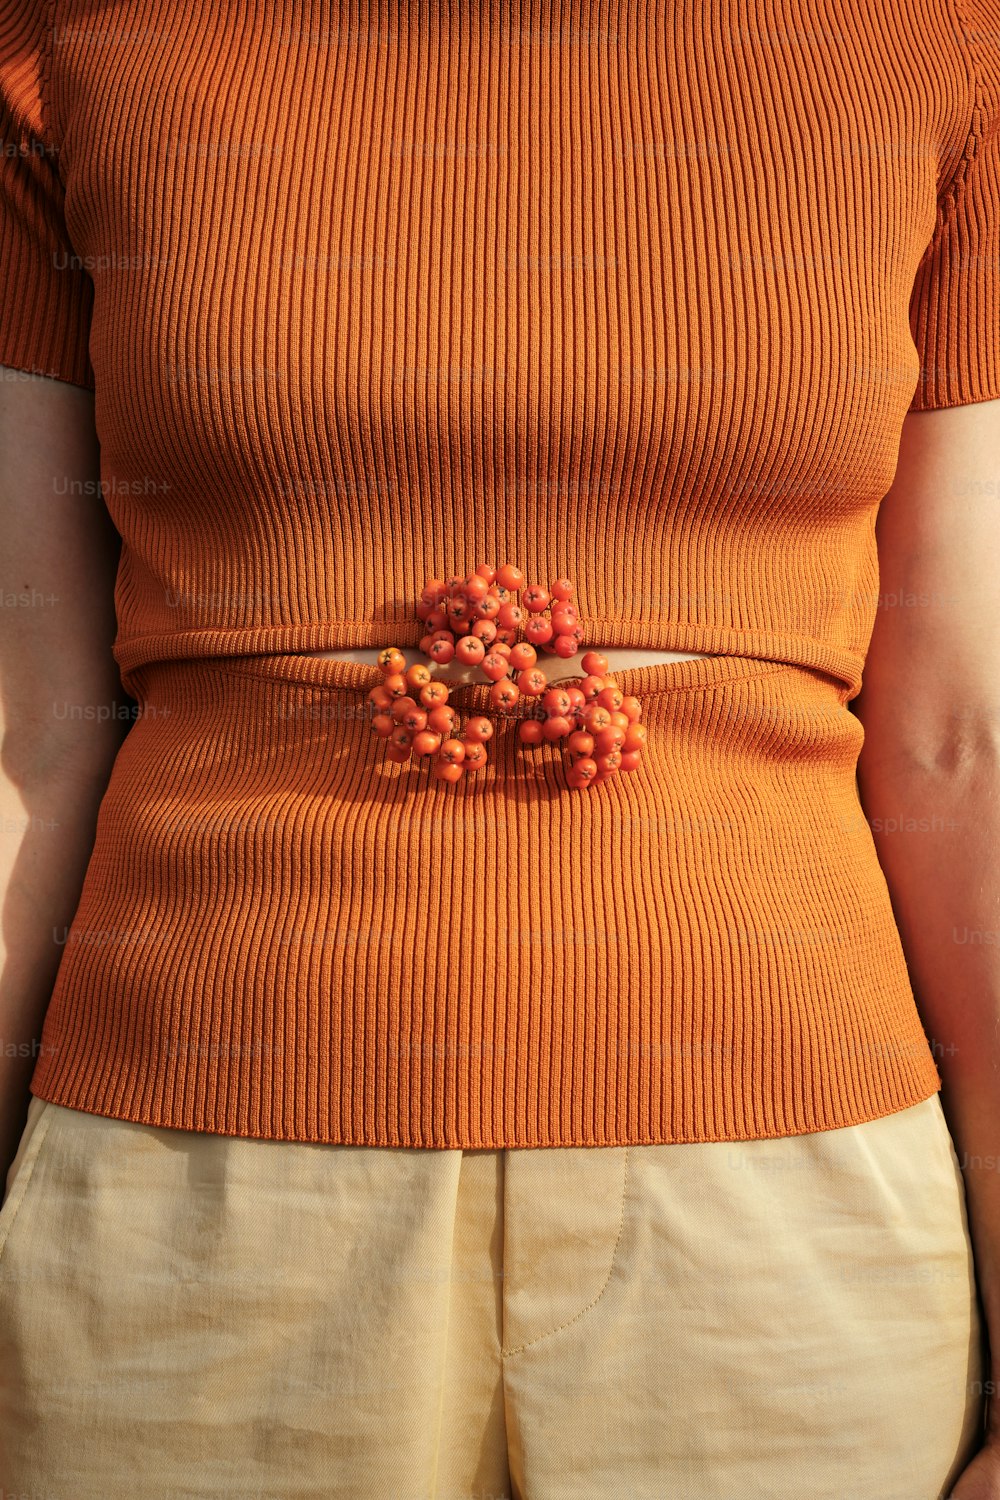 a woman wearing a belt with beads on it